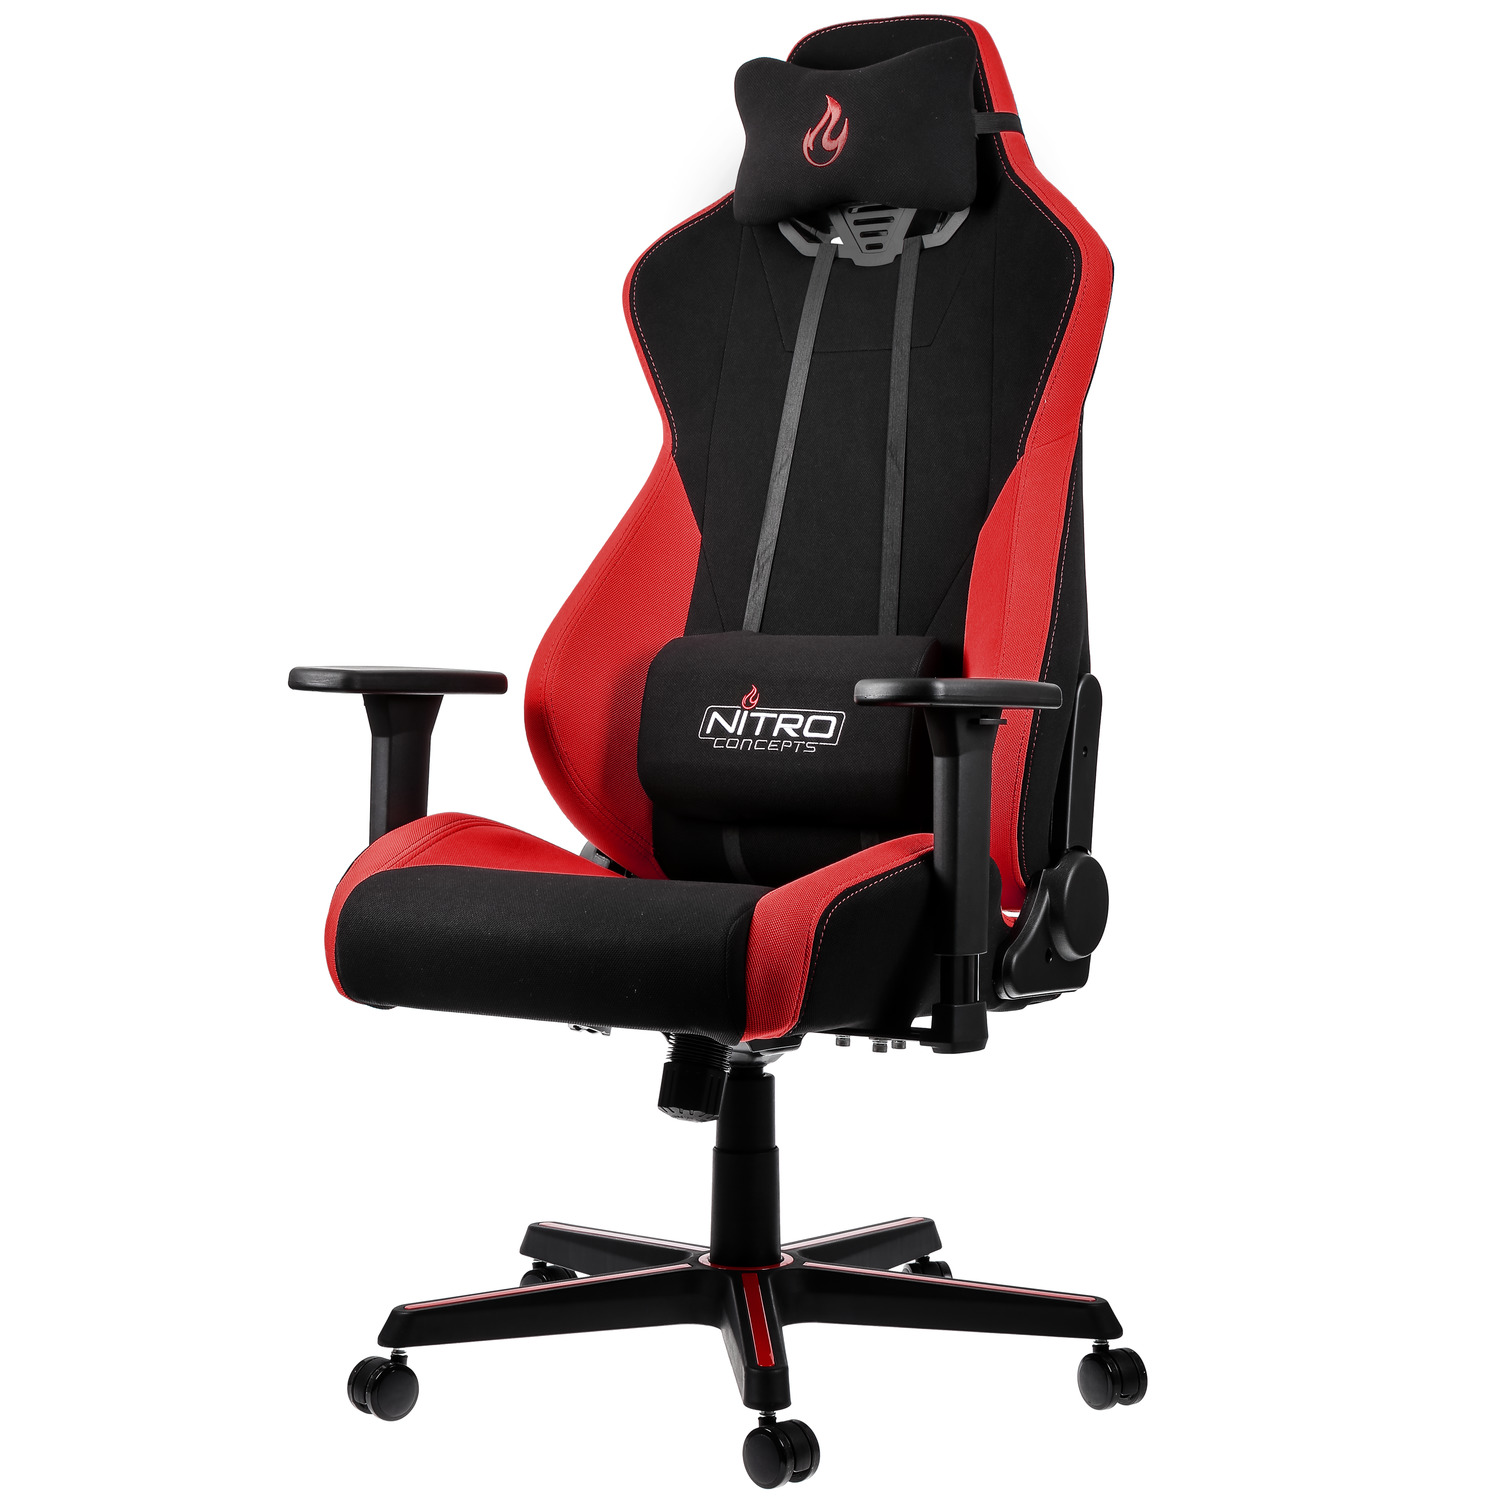 S300 Gaming Chairs